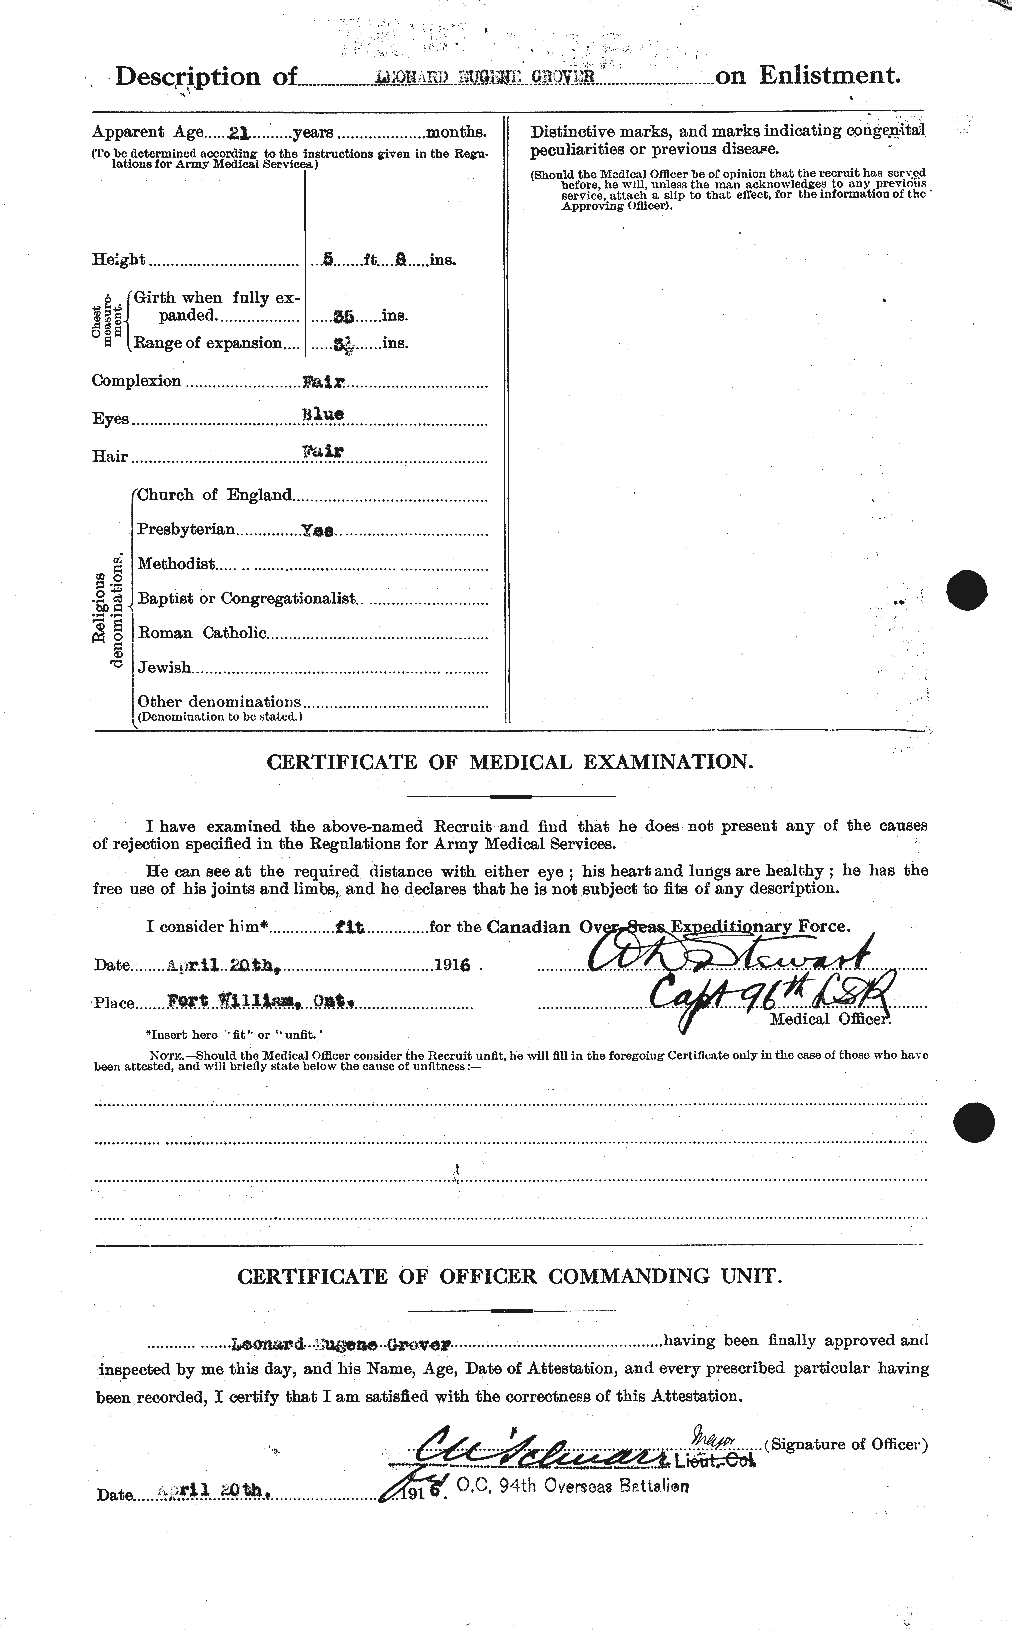 Personnel Records of the First World War - CEF 365596b